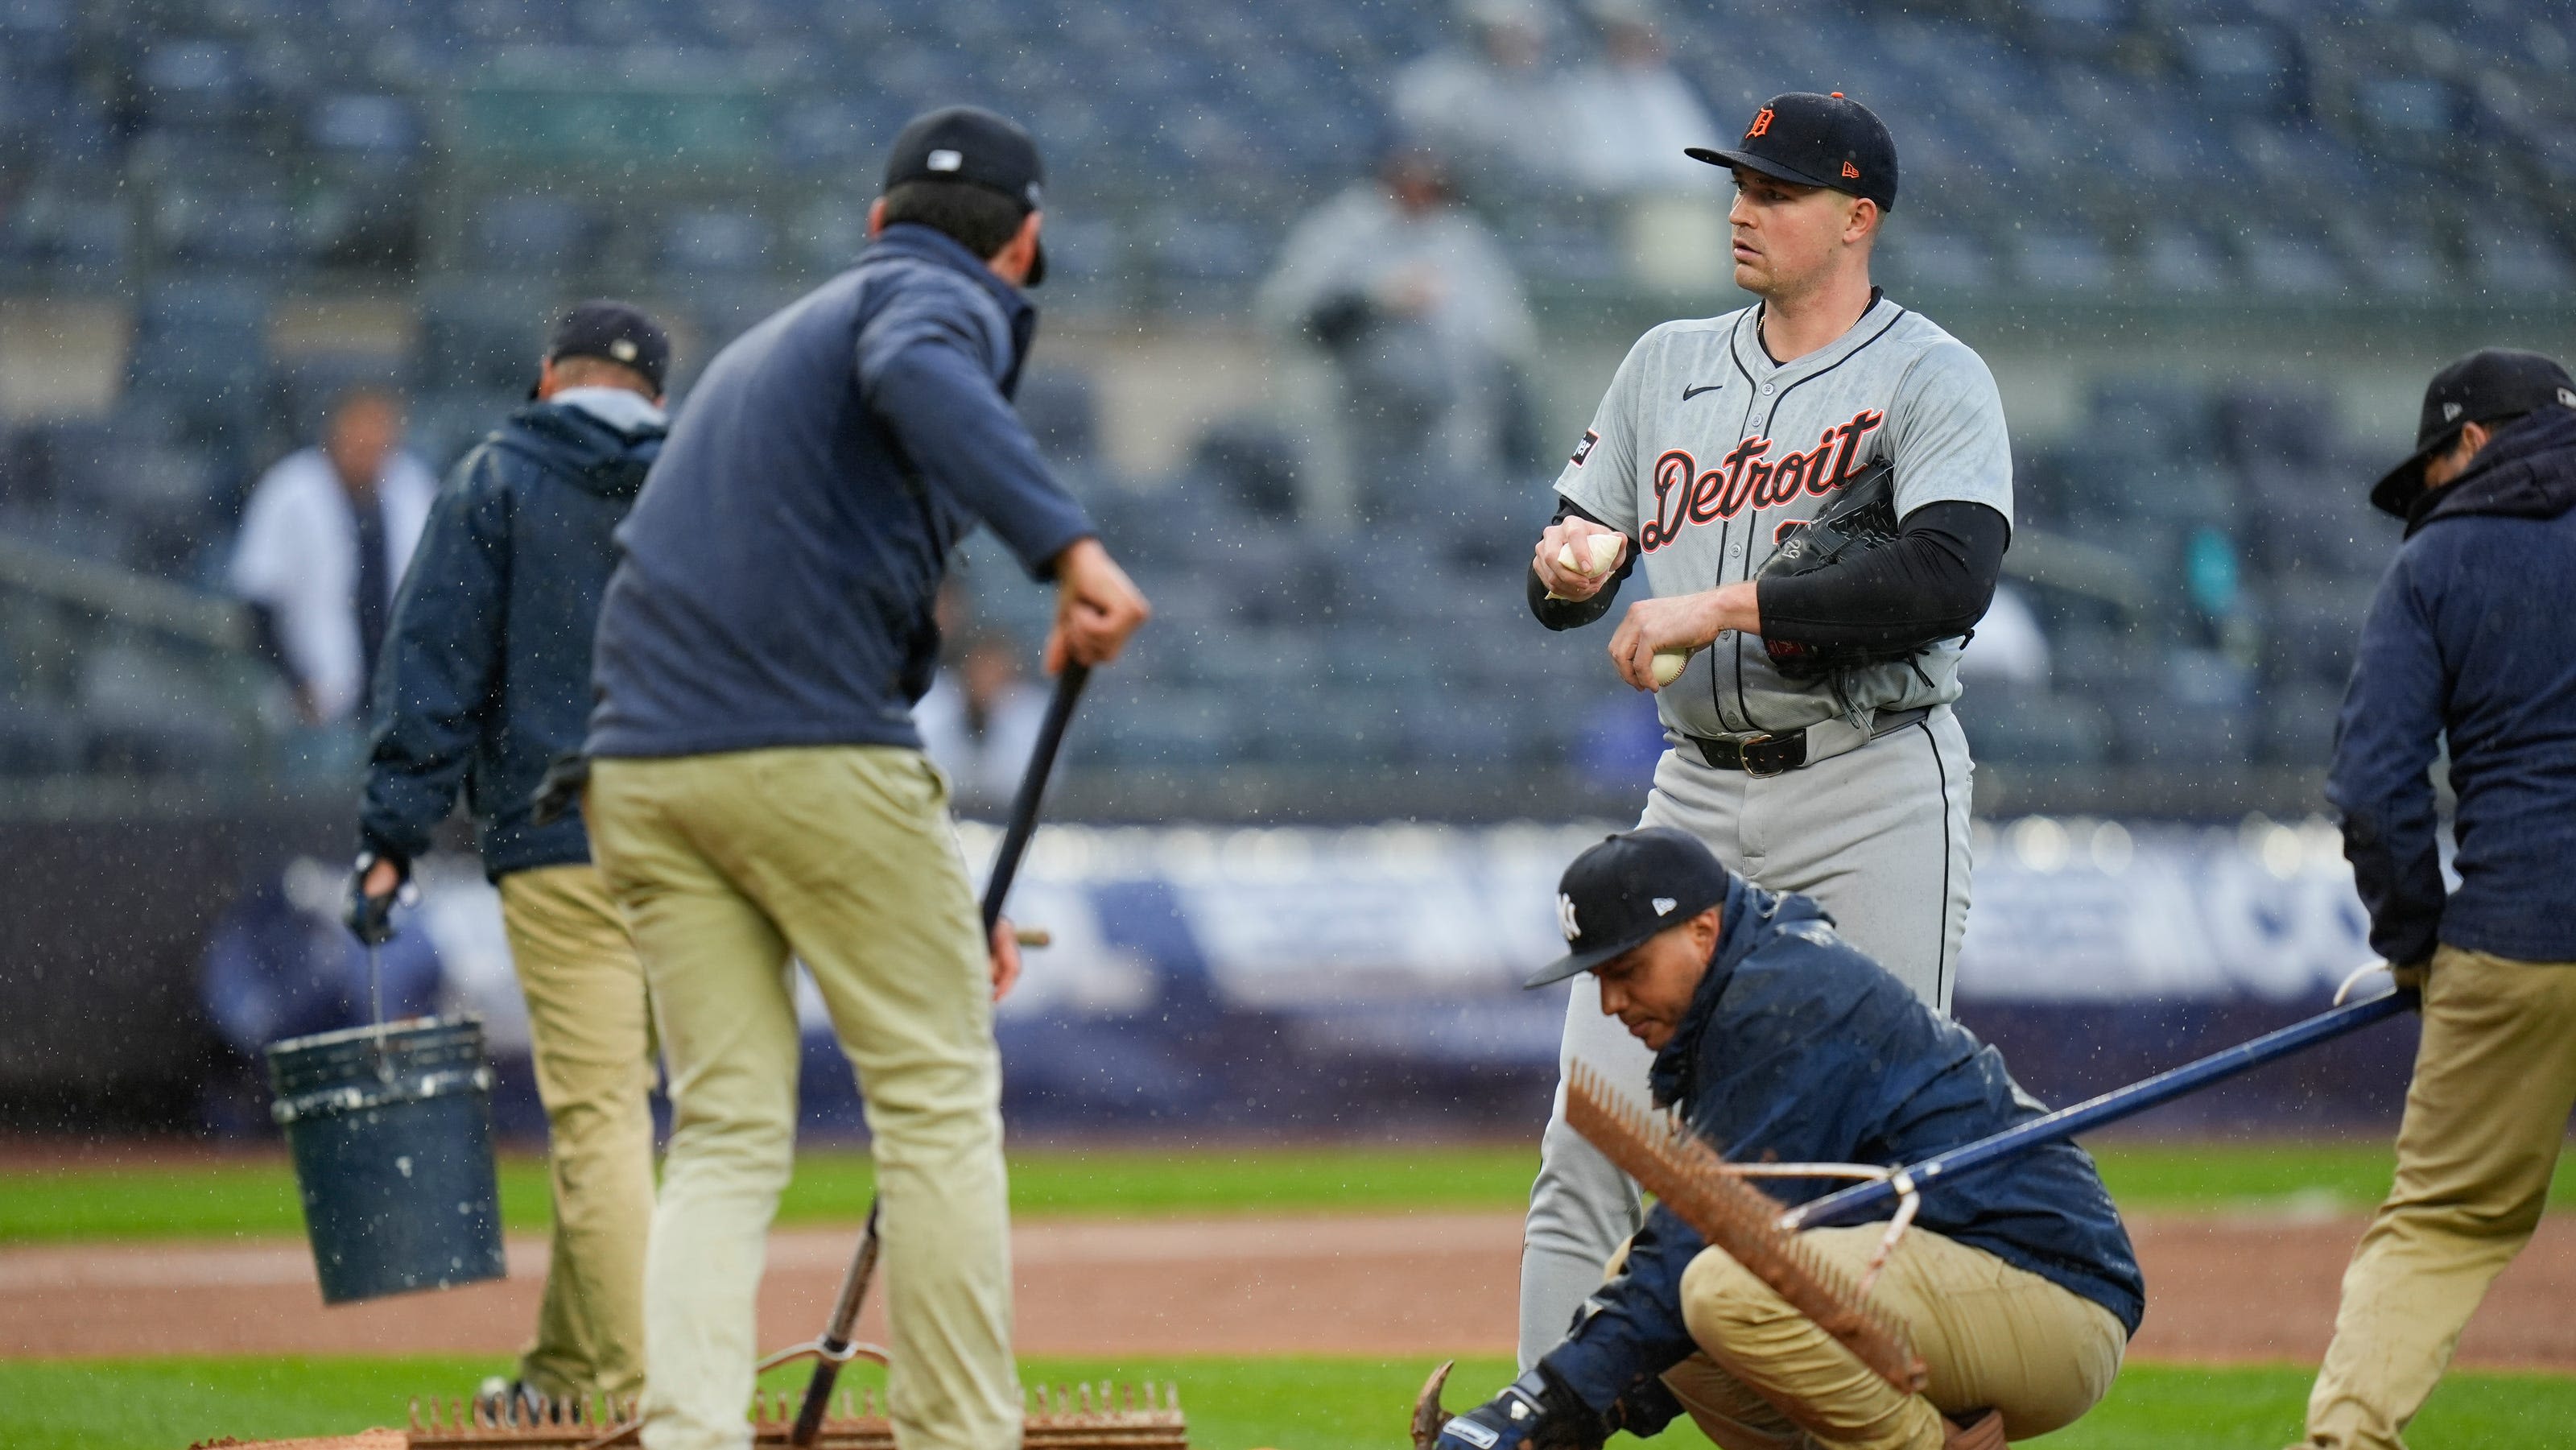 Tigers swept by Yankees, falling in shortened, soggy series finale